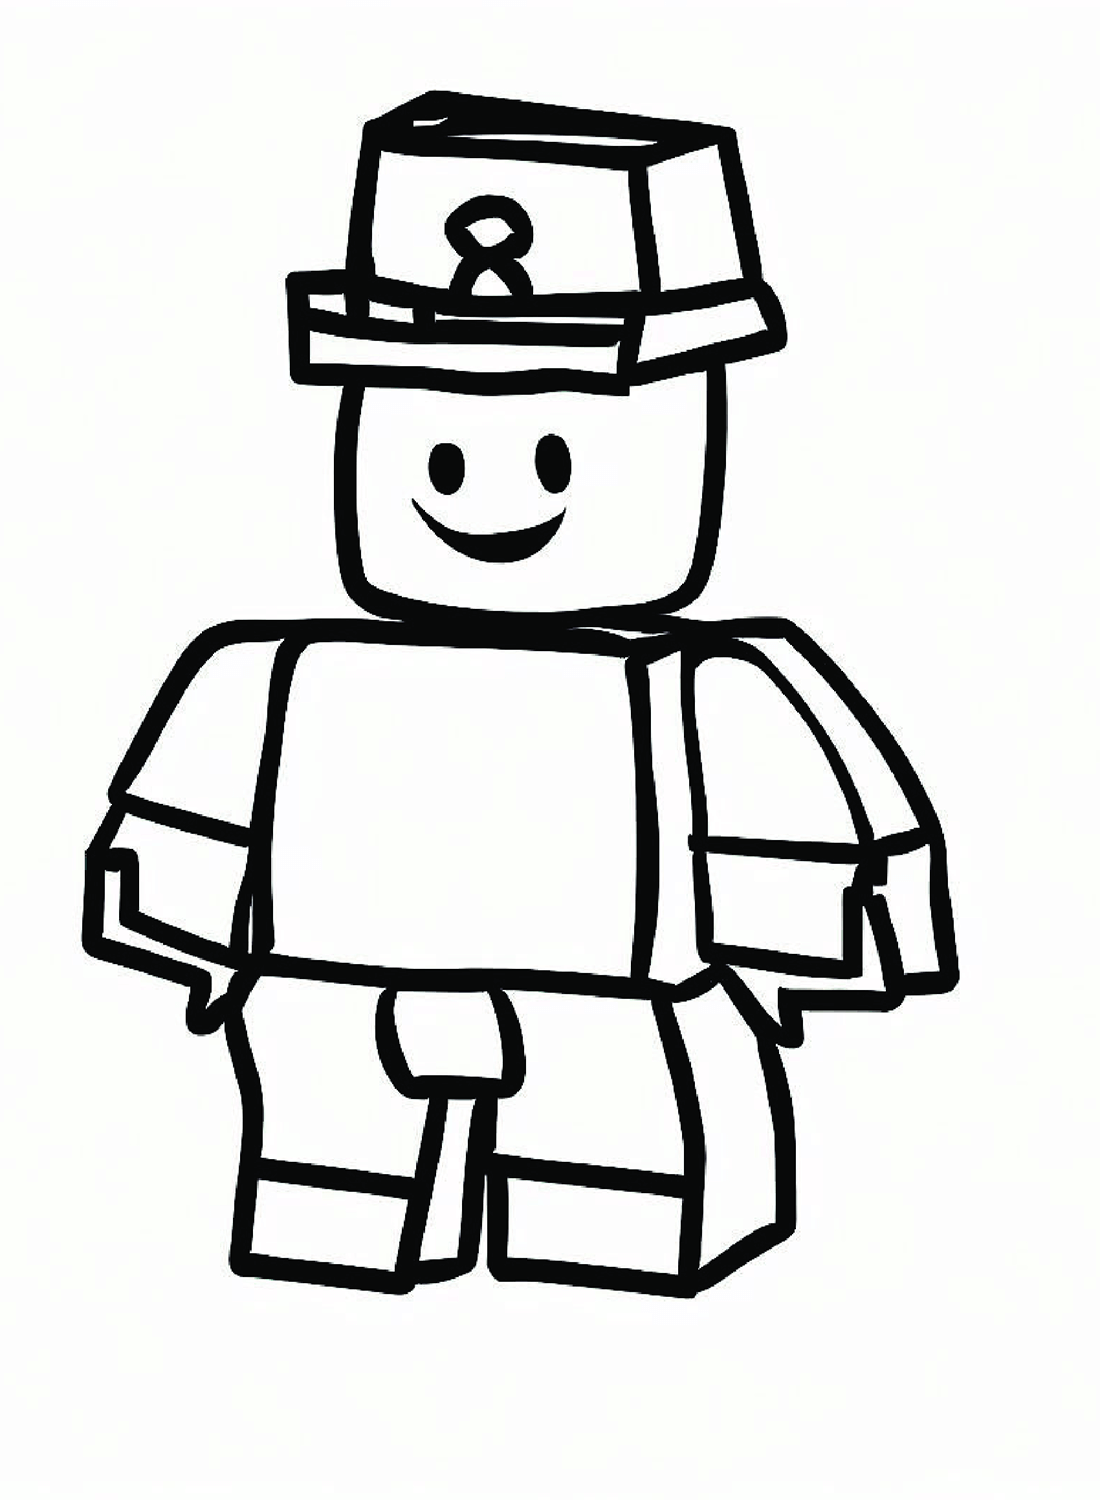 Roblox Image to Color from Roblox